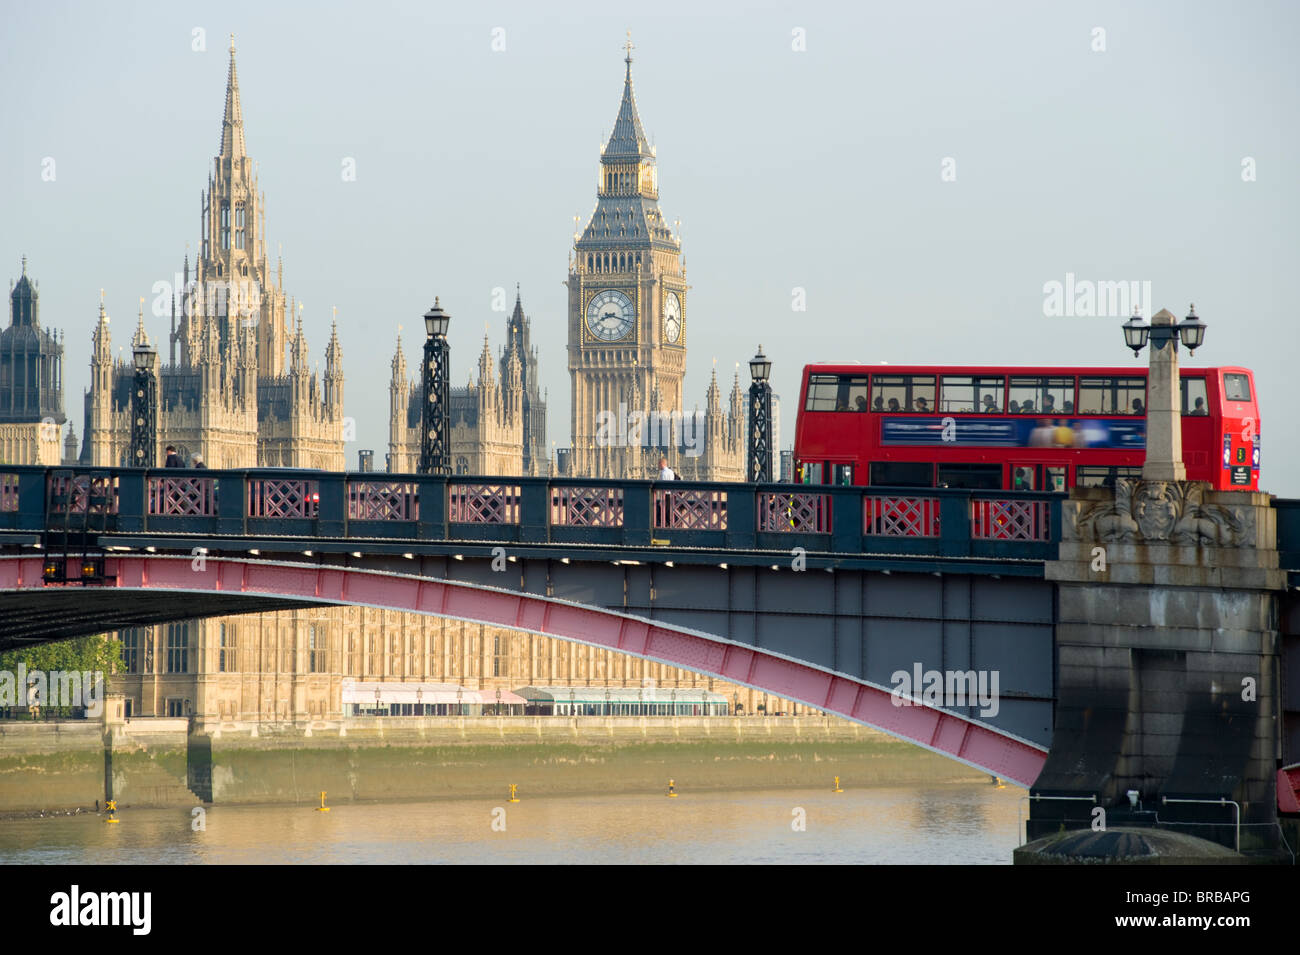 A London bus crossing Lambeth bridge over the Thames river with the Palace of Westminster in the background. London, England. Stock Photo